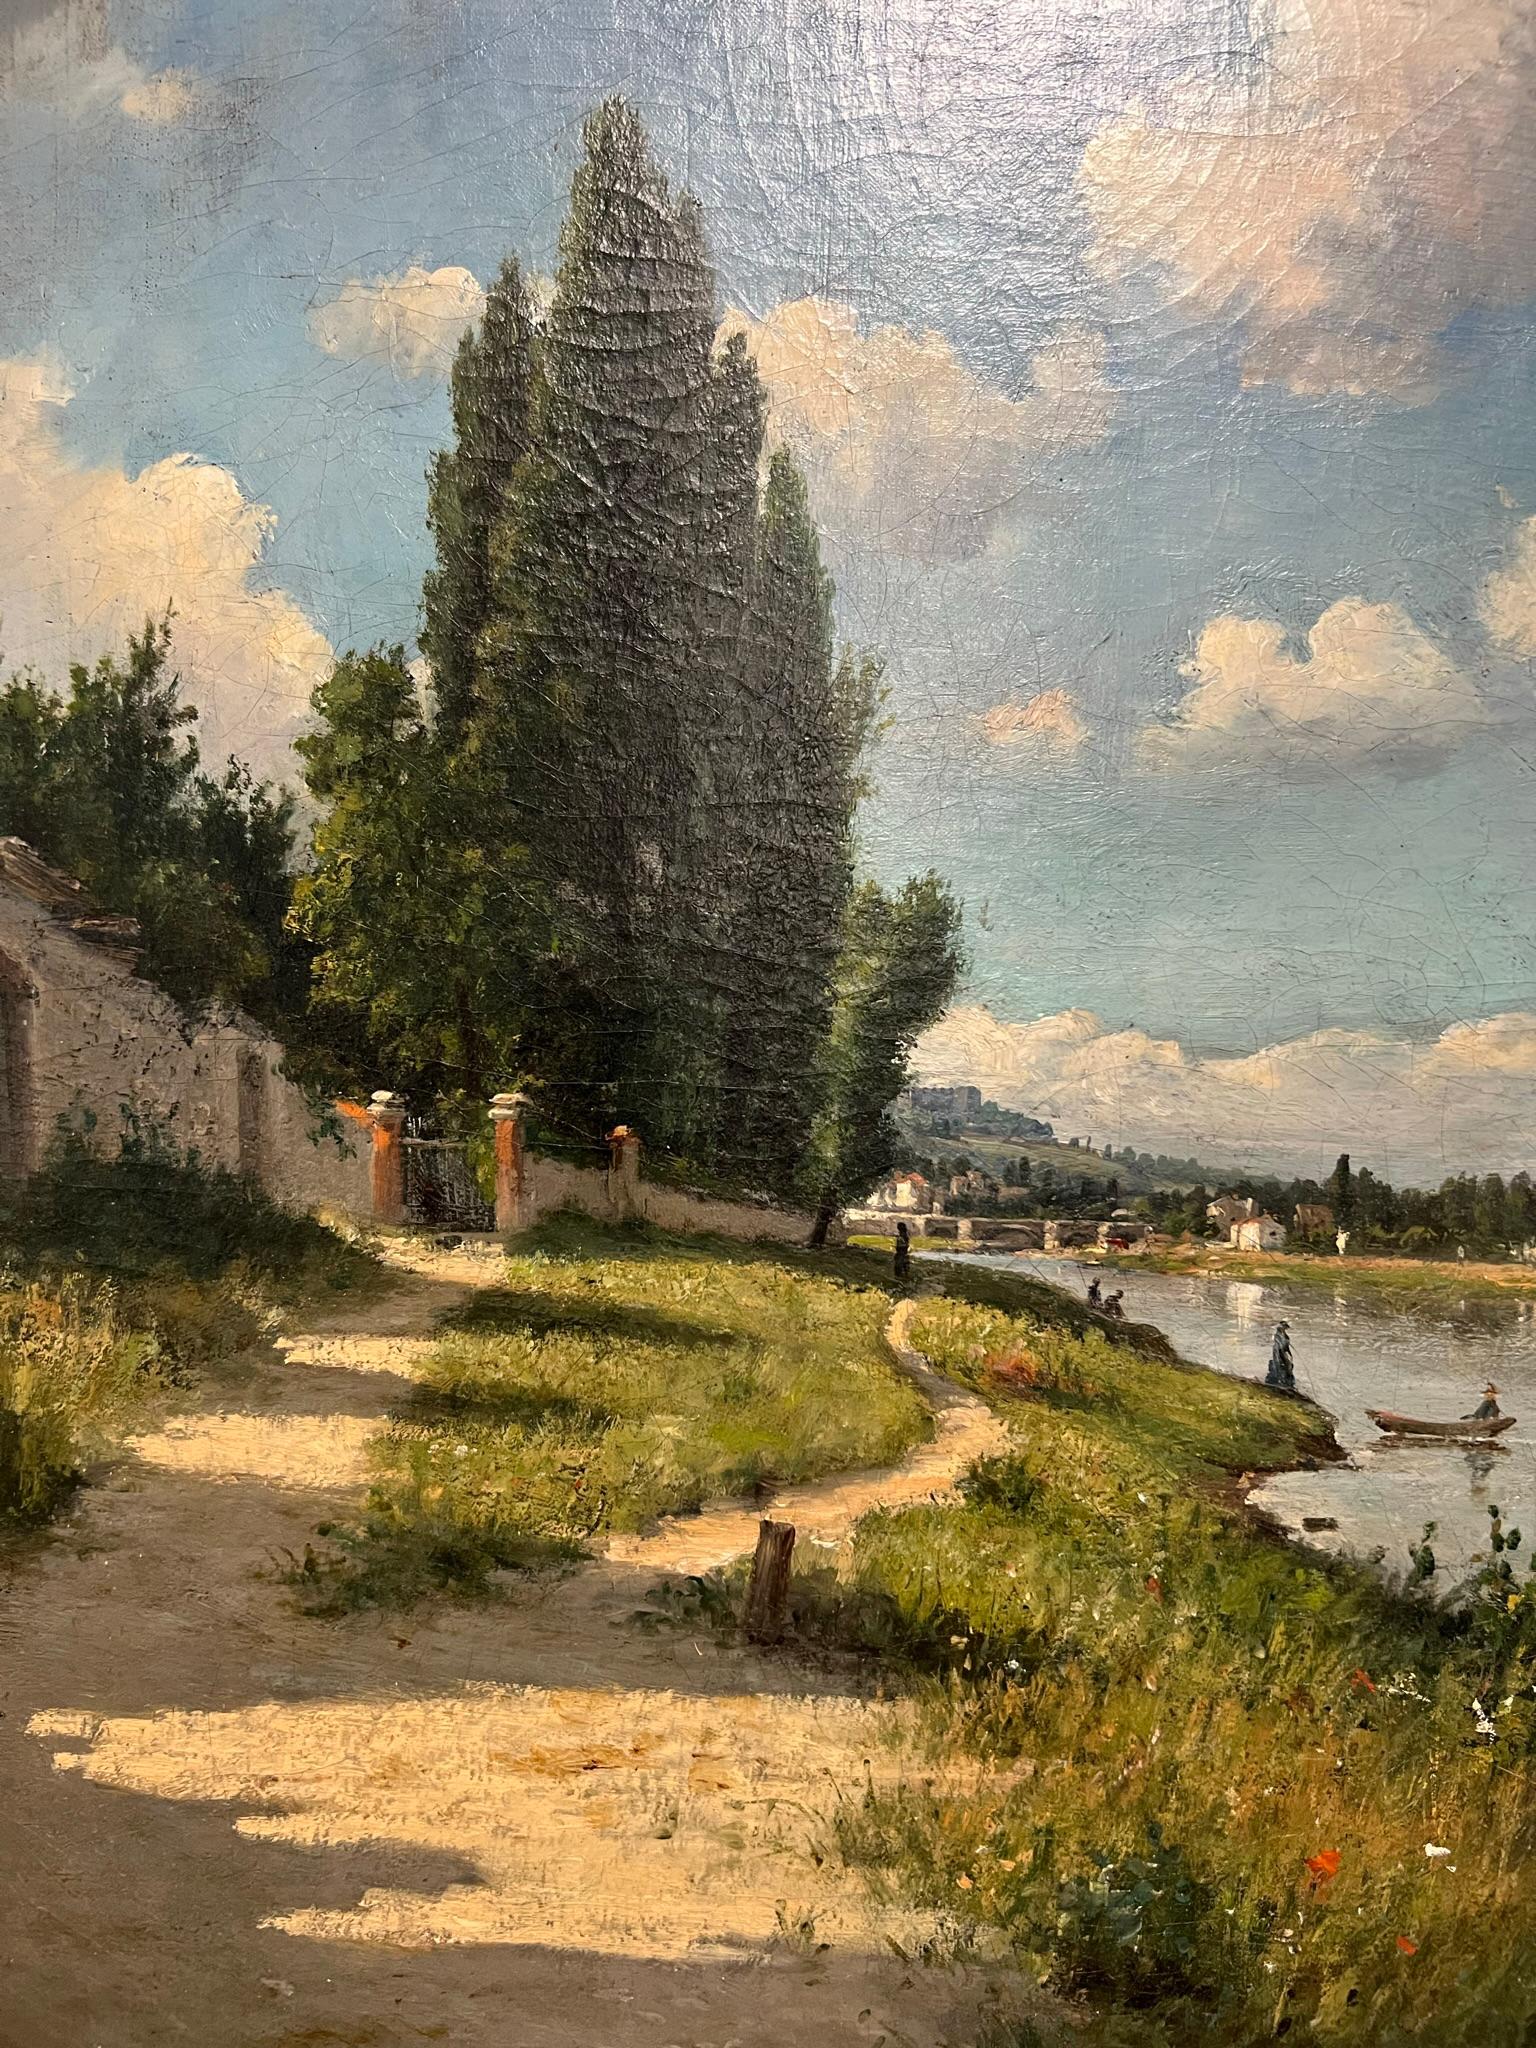 The picture shows a painting of a picturesque countryside with a trail and a river in it. The image depicts a road leading to a river with trees in the backdrop. In the image's foreground, people can be seen strolling along a path. There are clouds